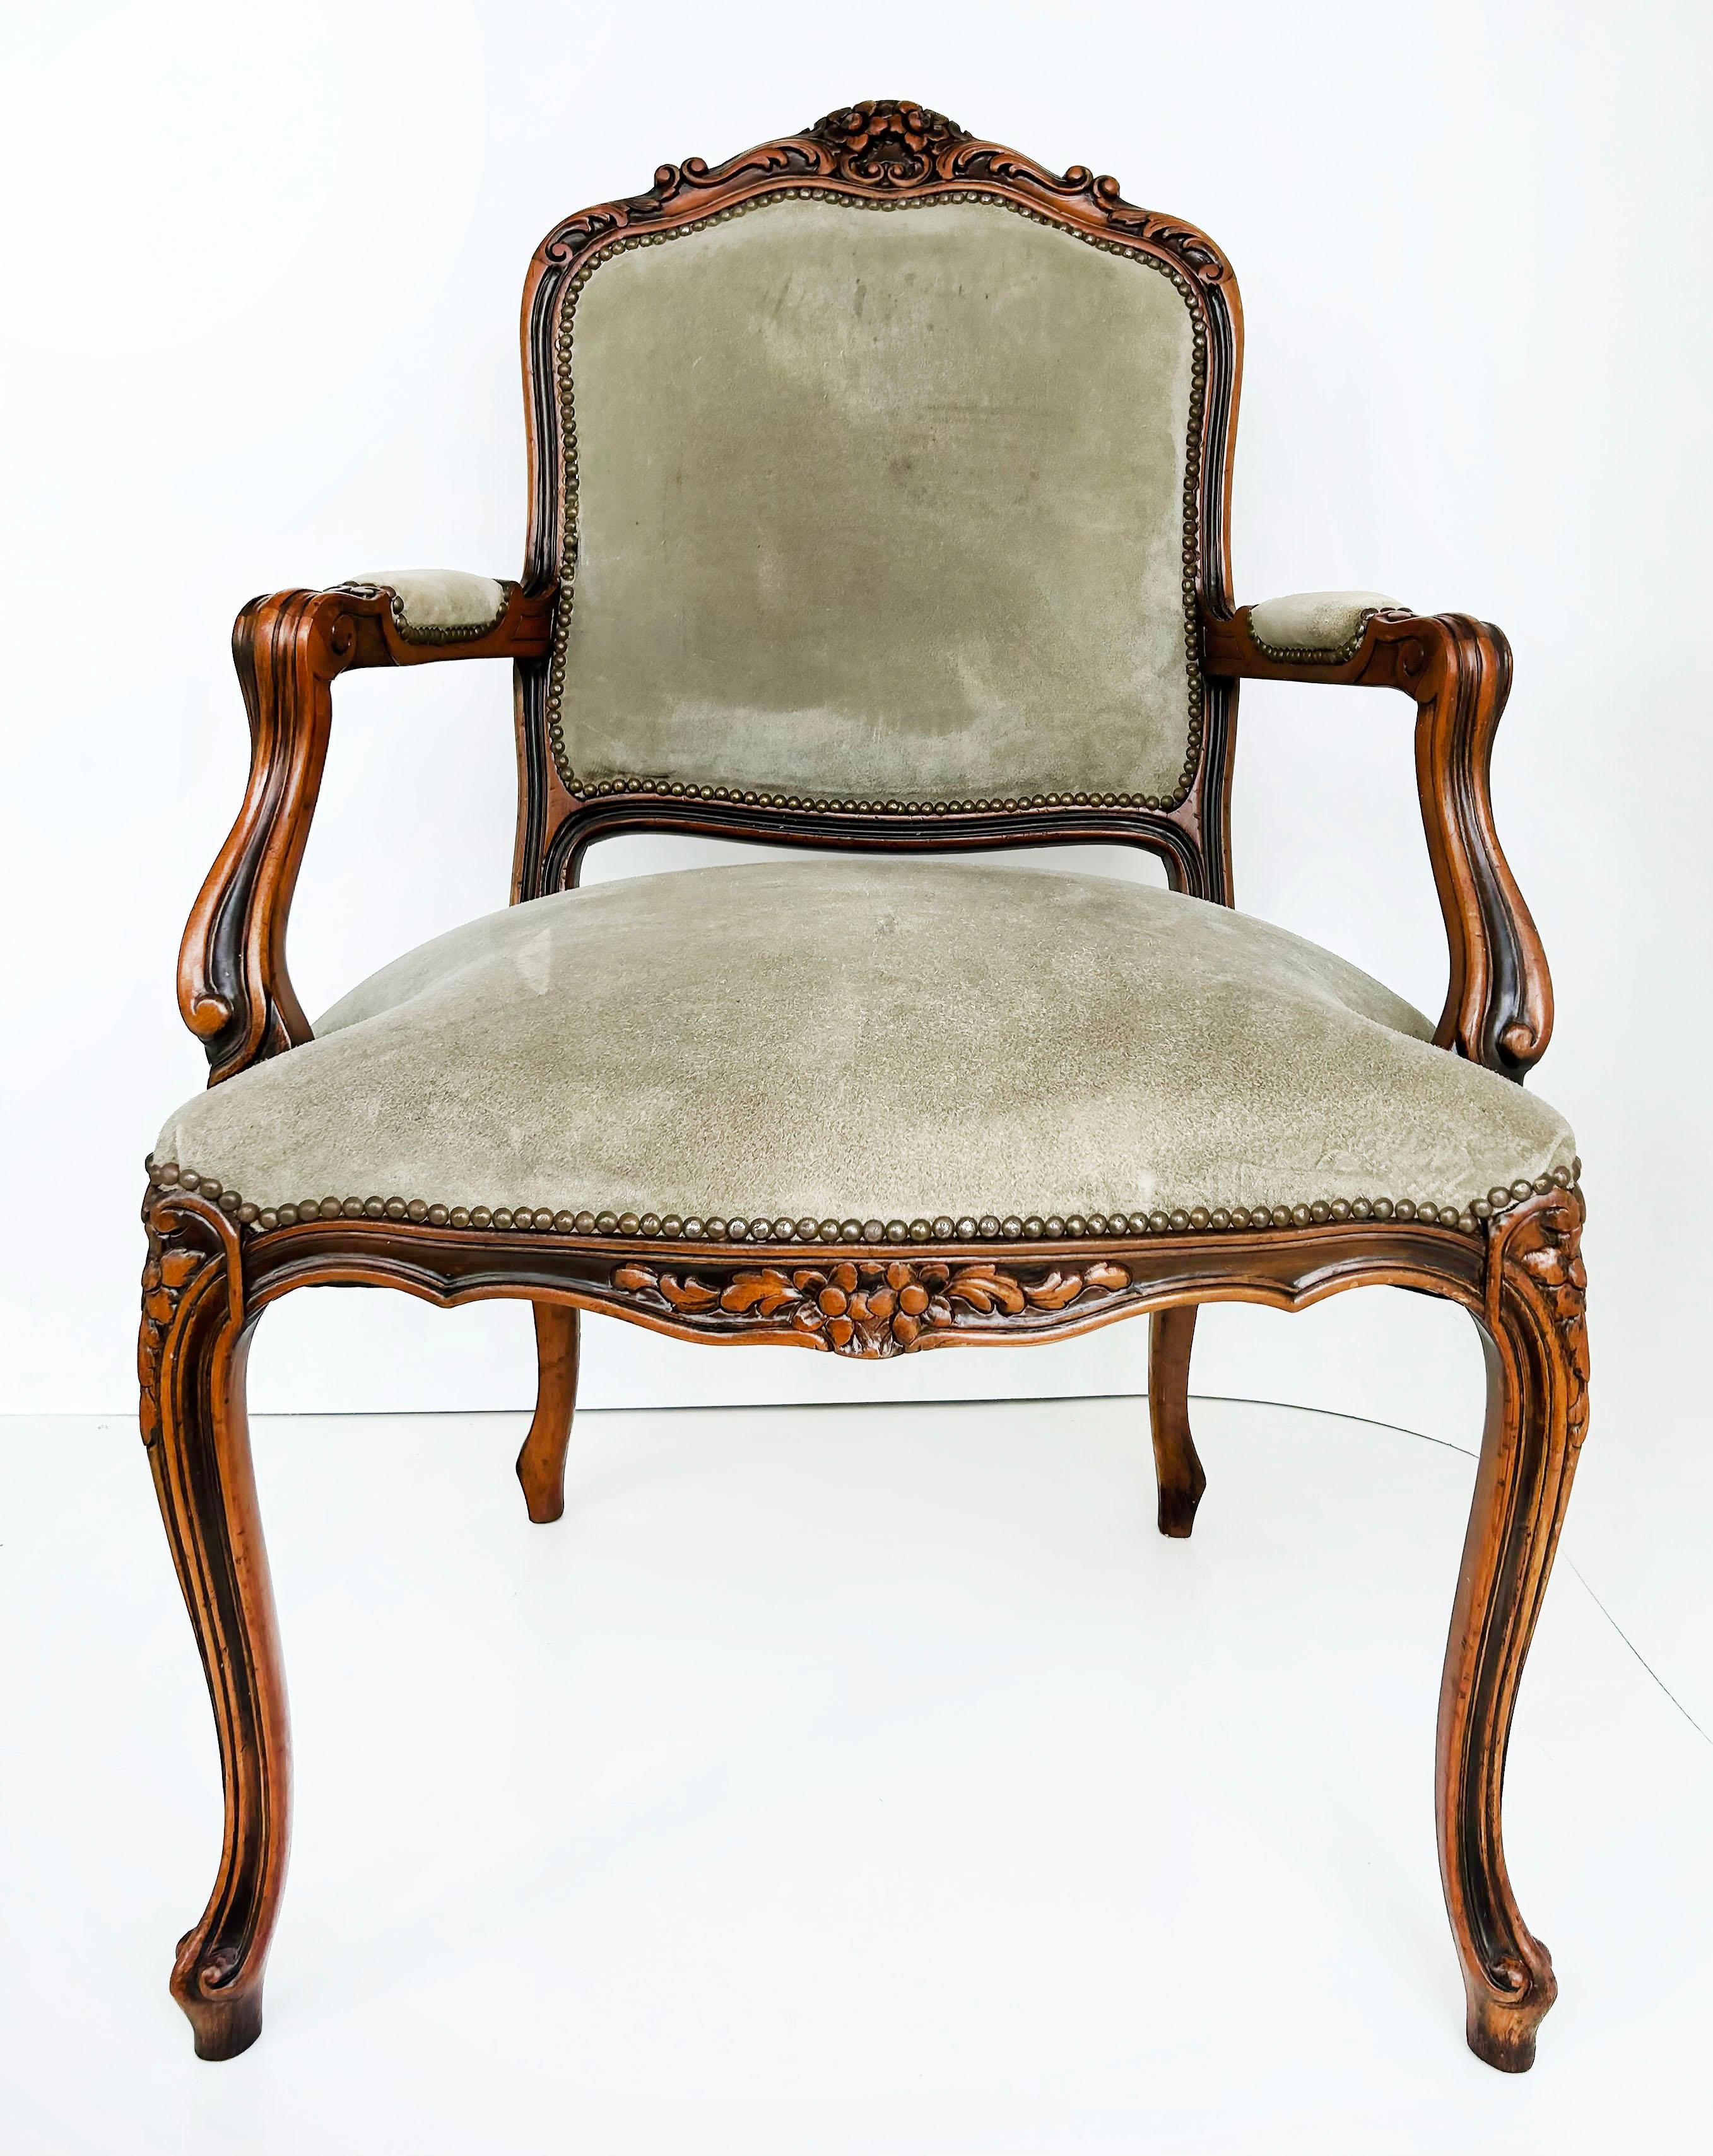 Italian Chateau d'Ax Carved Armchairs in Suede with Brass NailHeads, Pair

Offered for sale is a pair of Italian carved wood and suede armchairs with cabriole legs and brass nail heads. The chairs are In very good original condition with minor marks